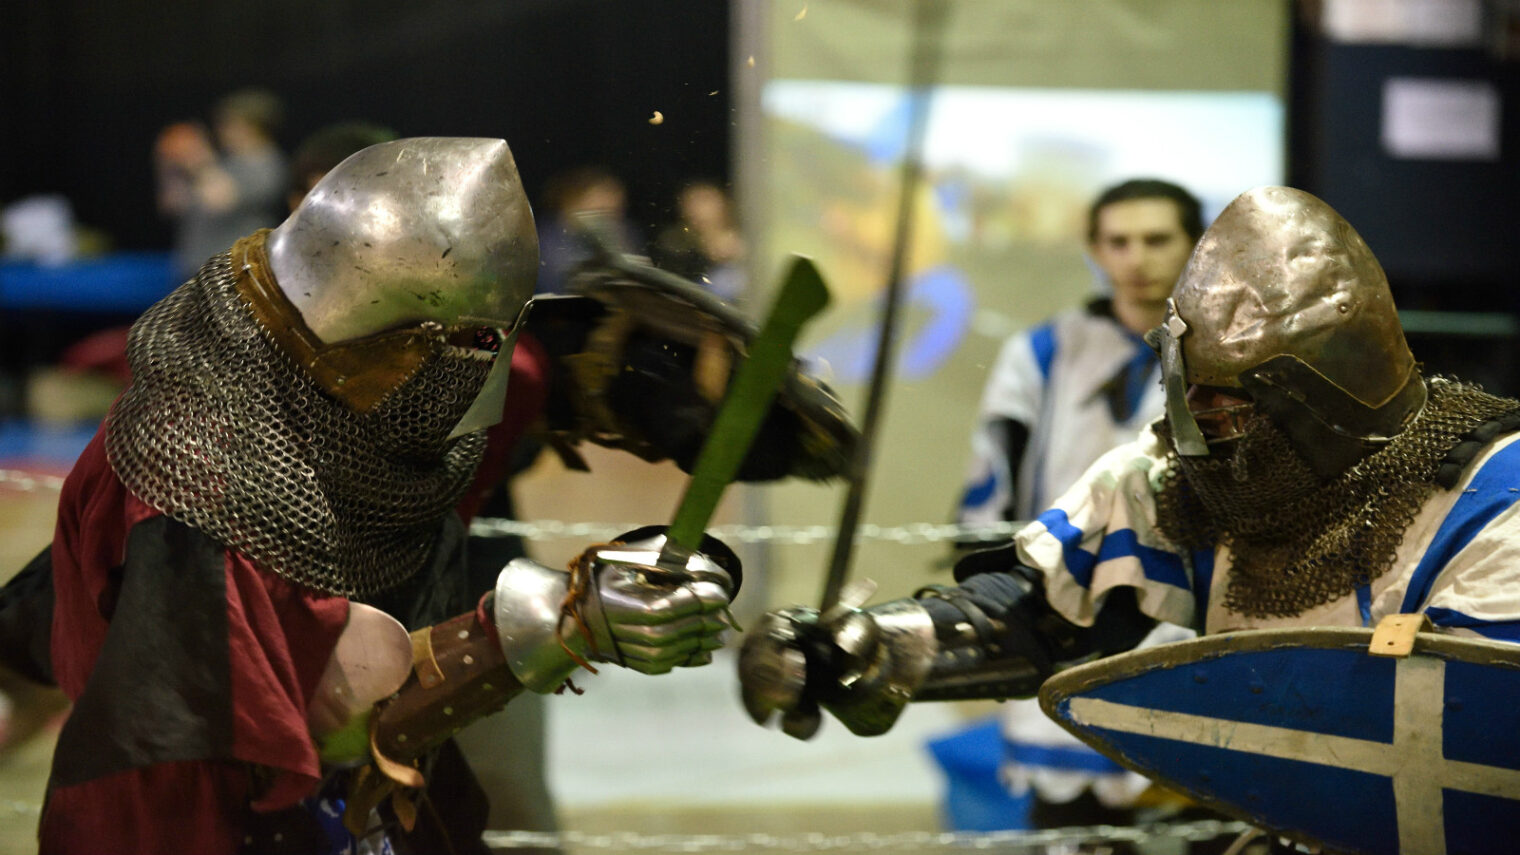 Participants from around the world brought their 14th century-style garb, weapons and armor to Tel Aviv to take part in the World Medieval Fighting Championship-Israeli challenge in Tel Aviv, Jan. 23, 2016. Photo by Gili Yaari/FLASH90